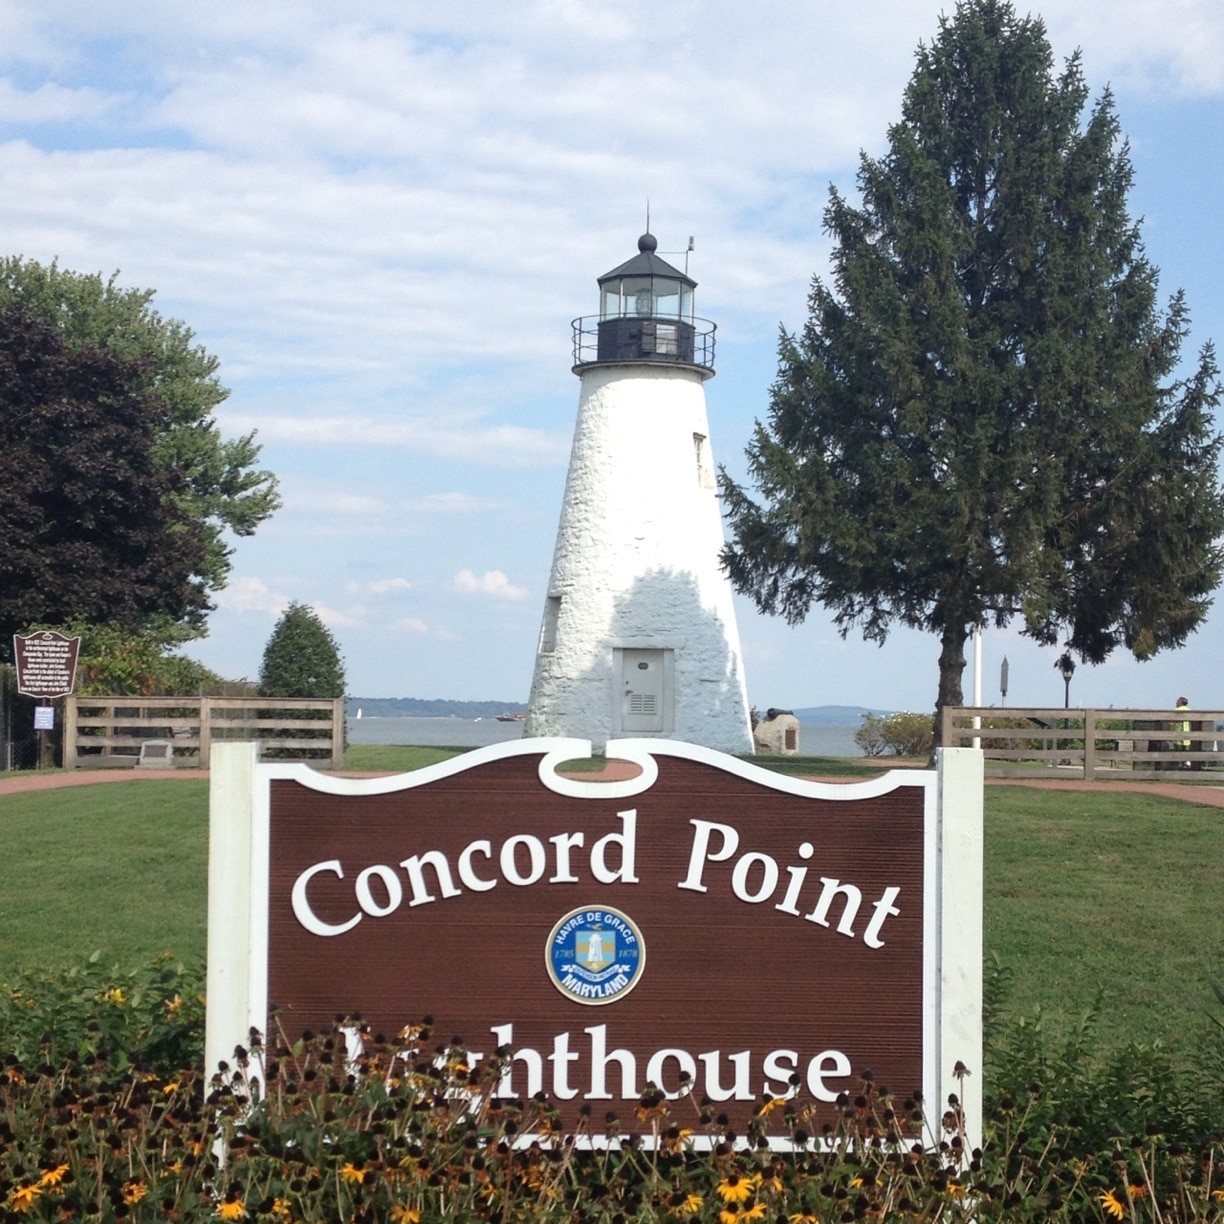 Concord Point Lighthouse in Havre De Grace was built in 1827. It is the oldest continually operated lighthouse in Maryland. The lighthouse is open Apr-Oct on weekends.